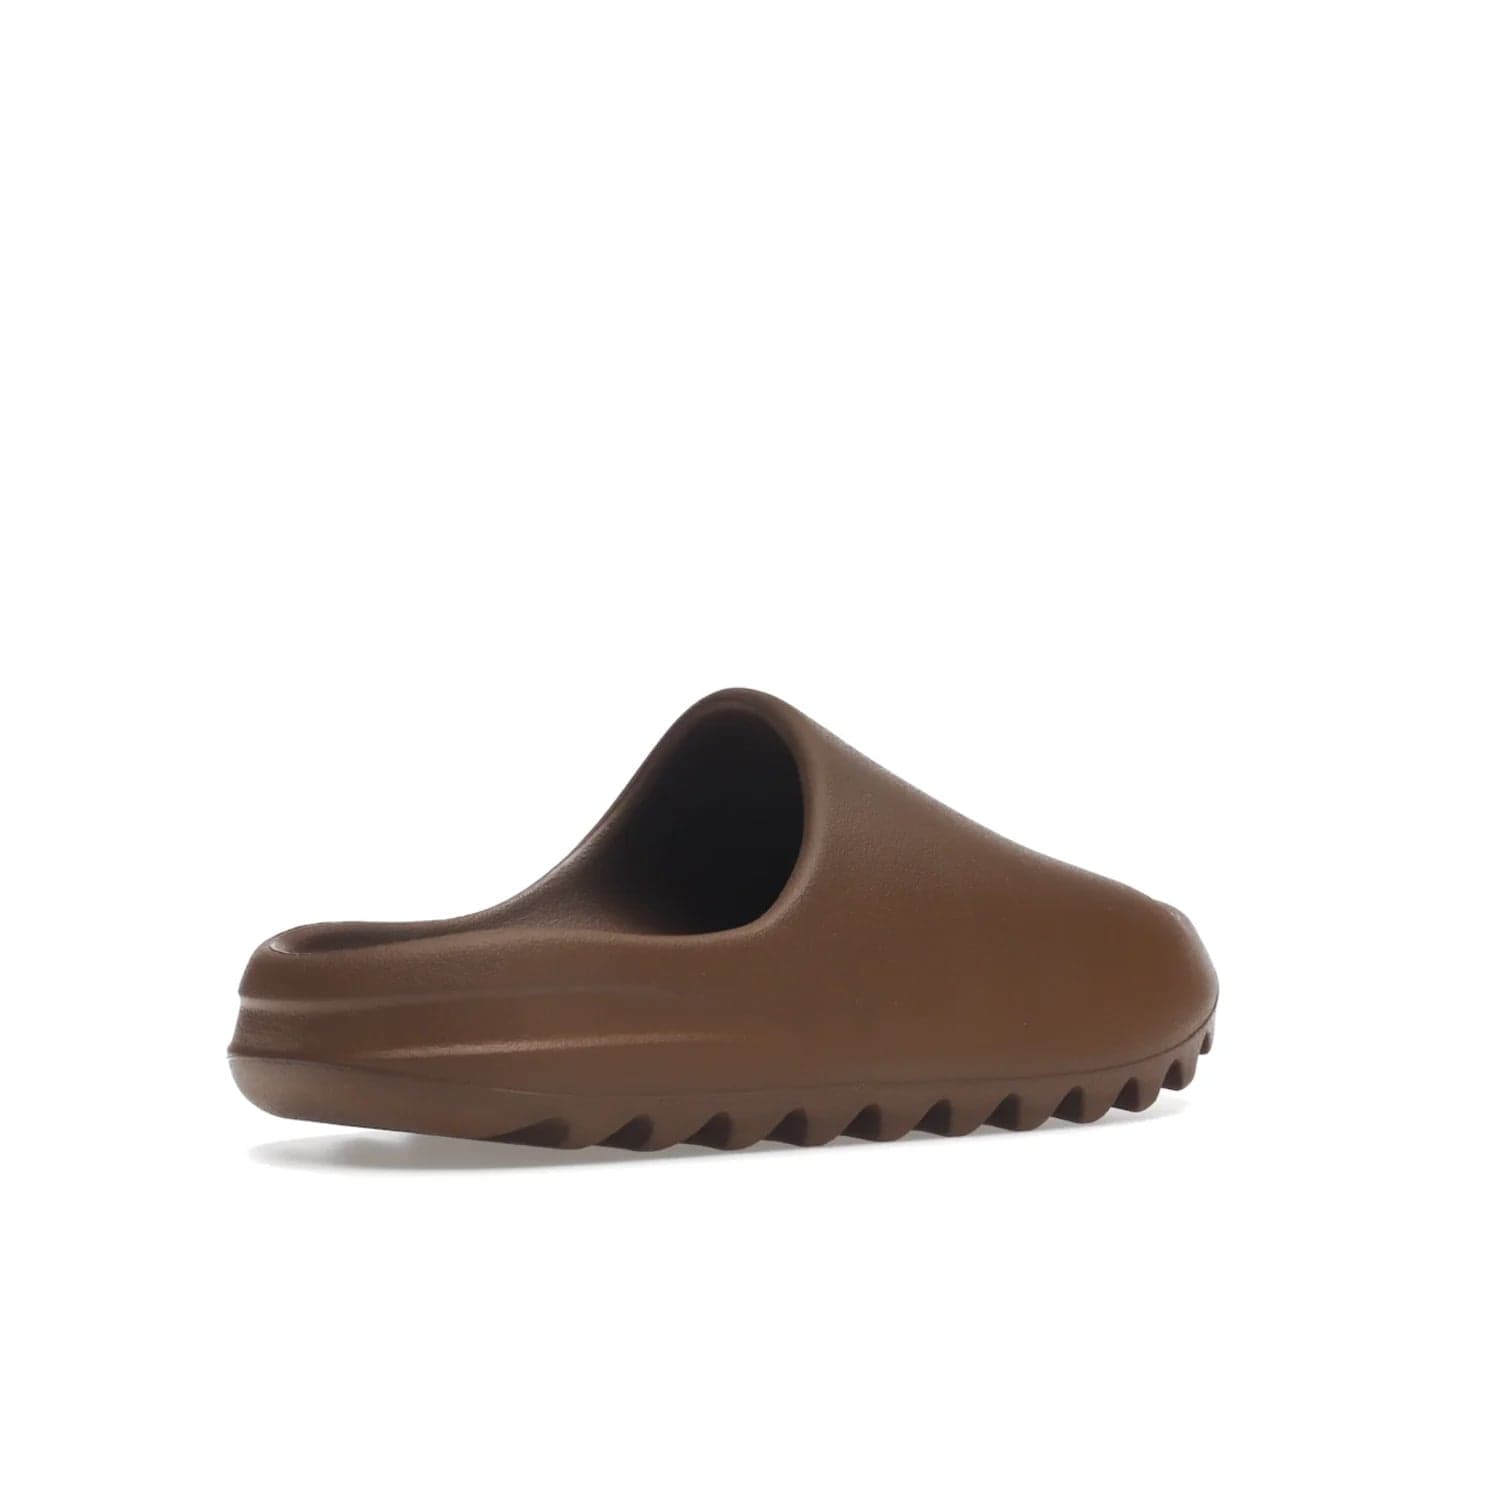 adidas Yeezy Slide Flax - Image 33 - Only at www.BallersClubKickz.com - Score the perfect casual look with the adidas Yeezy Slide Flax. Made with lightweight injected EVA plus horizontal grooves underfoot for traction. Release on August 22, 2022. $70.